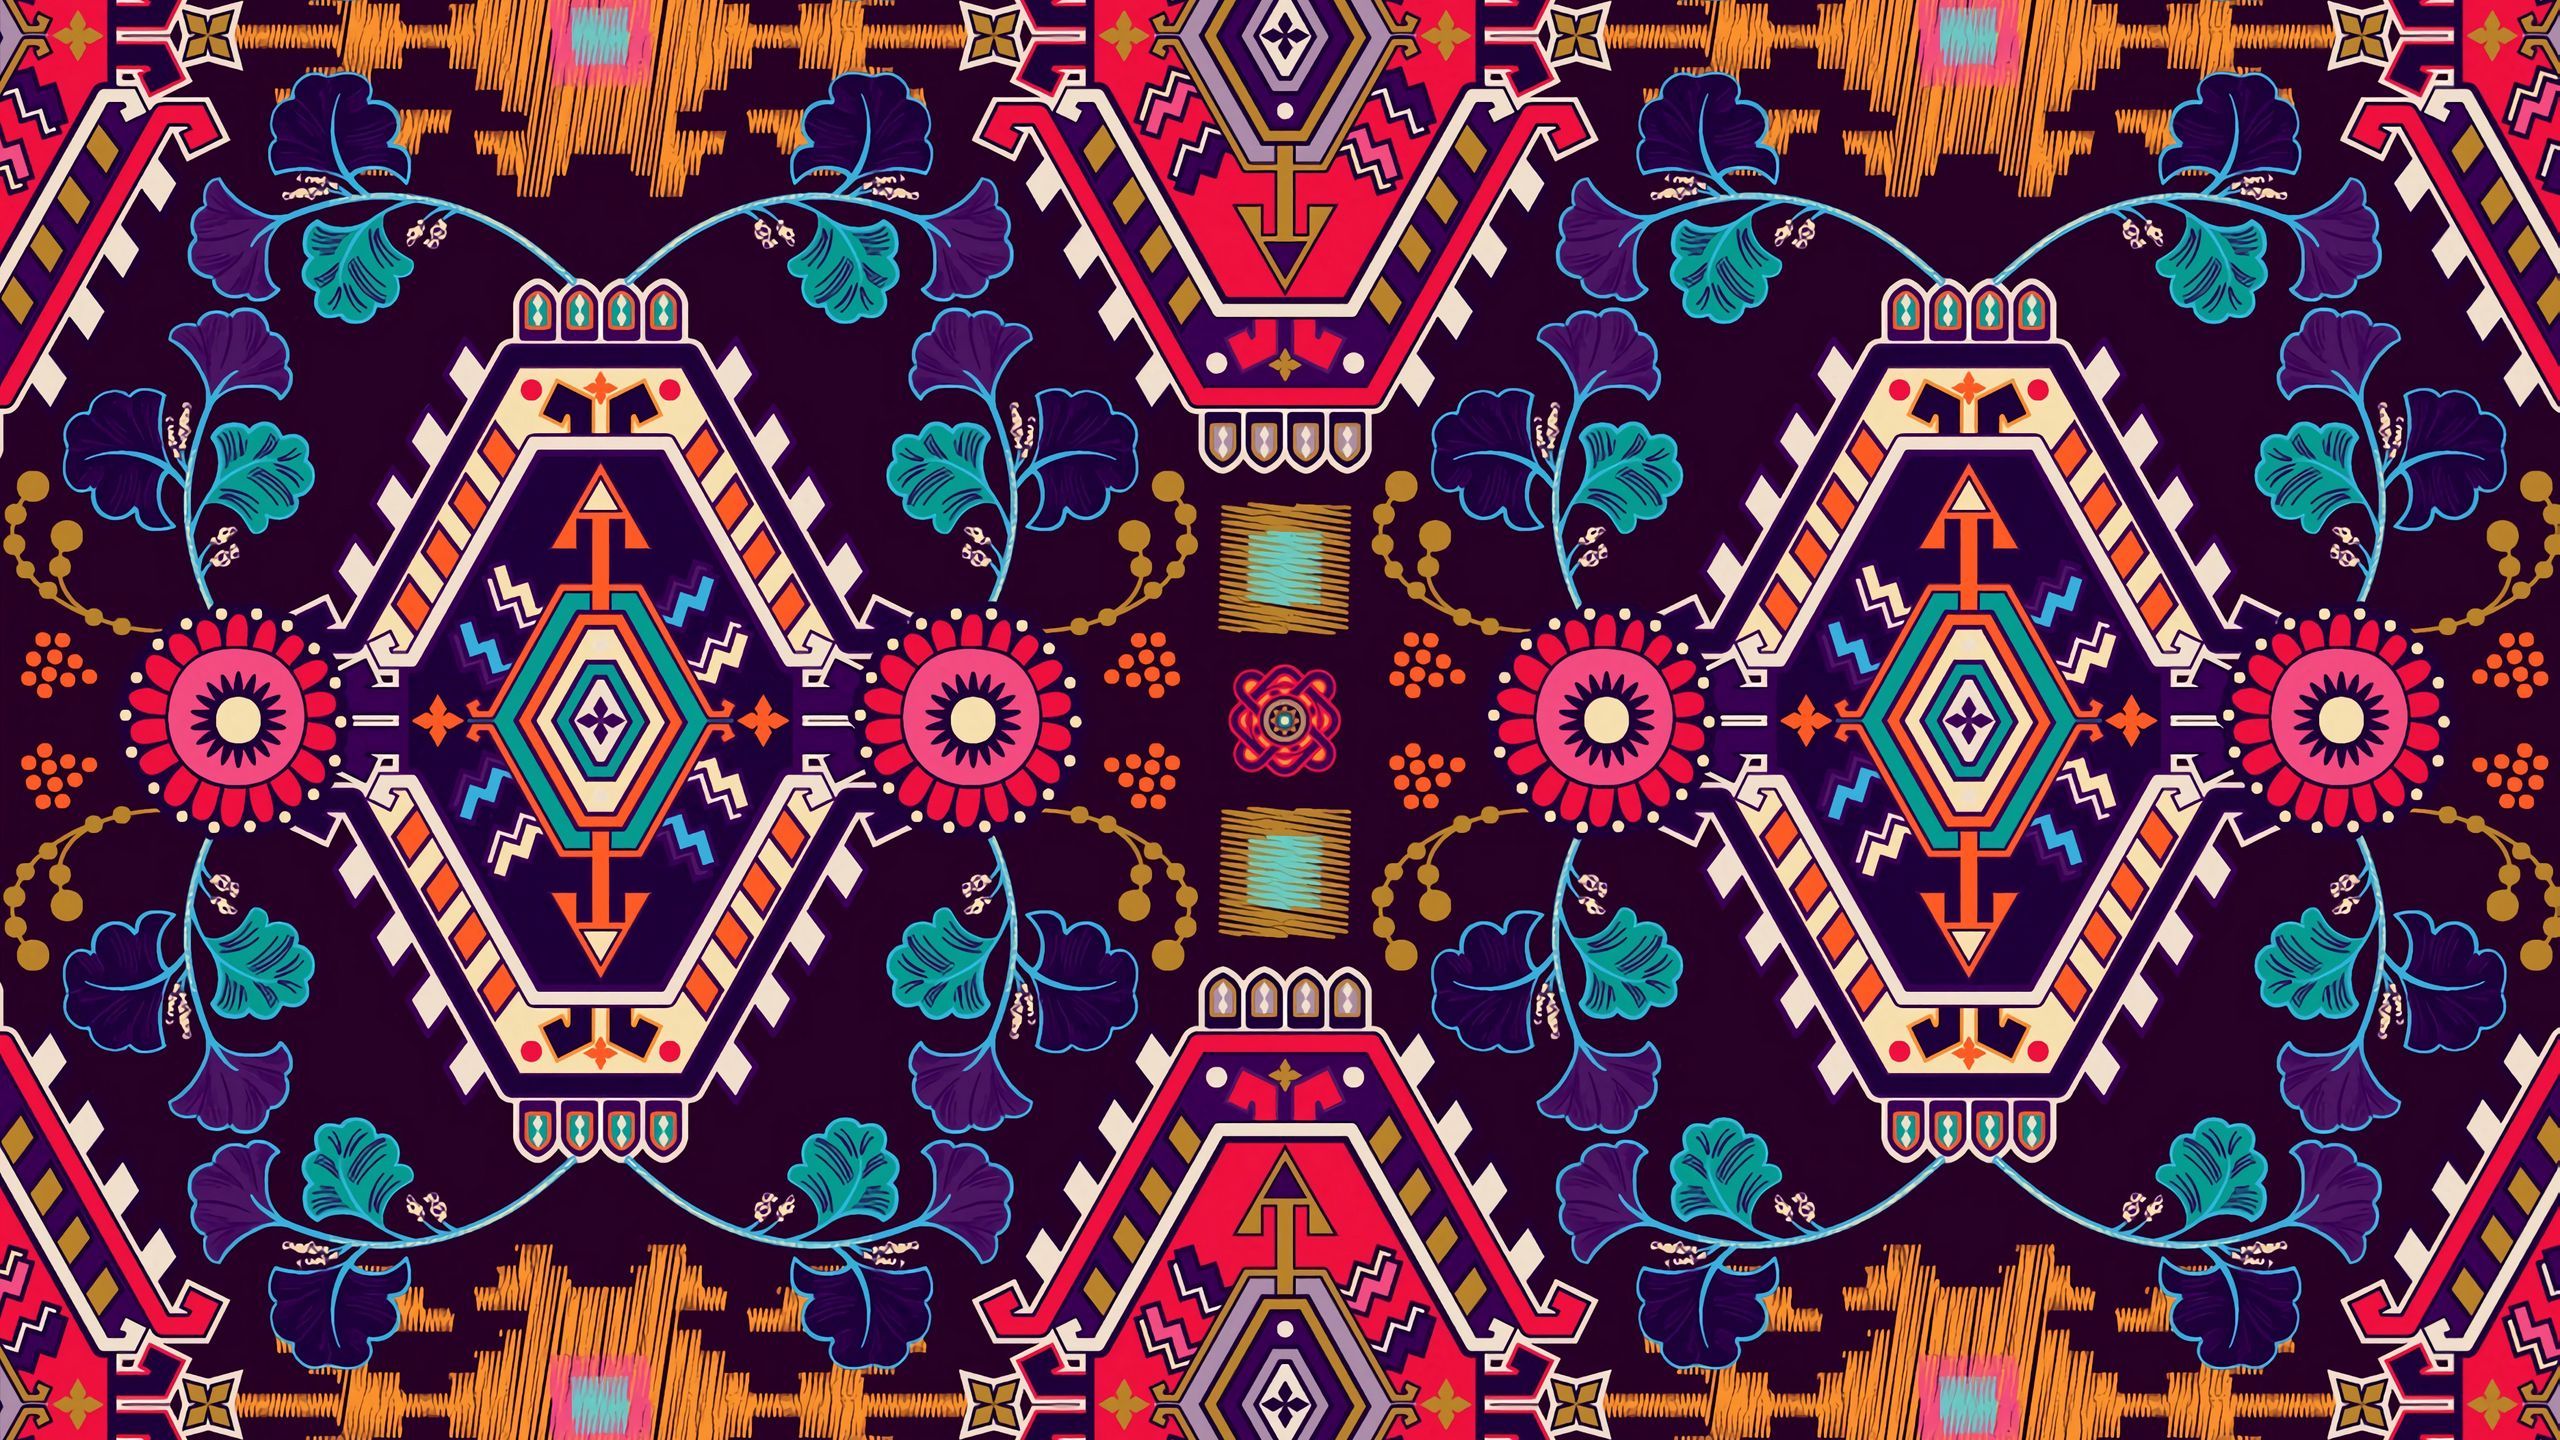 Download wallpaper 2560x1440 pattern, ornament, motif, colorful, texture widescreen 16:9 HD background